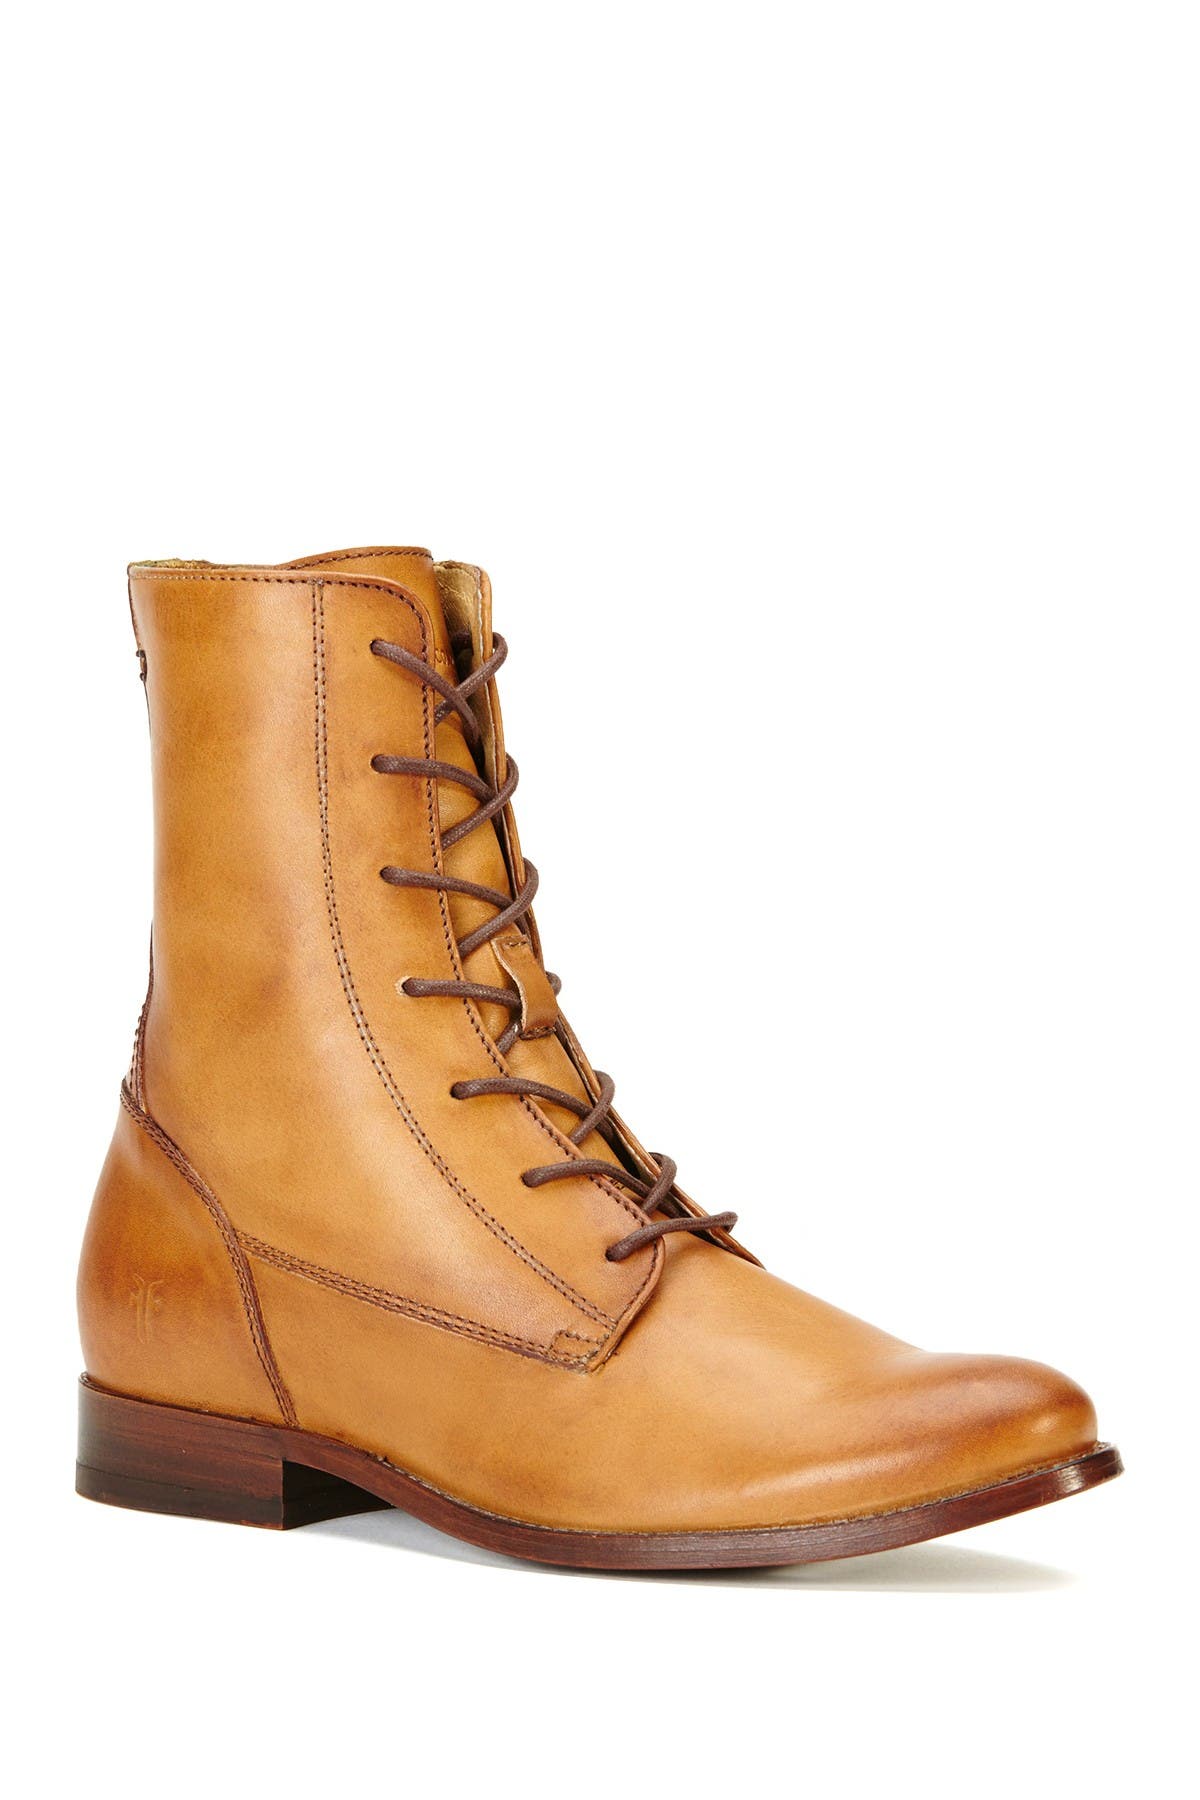 frye melissa lace up boot